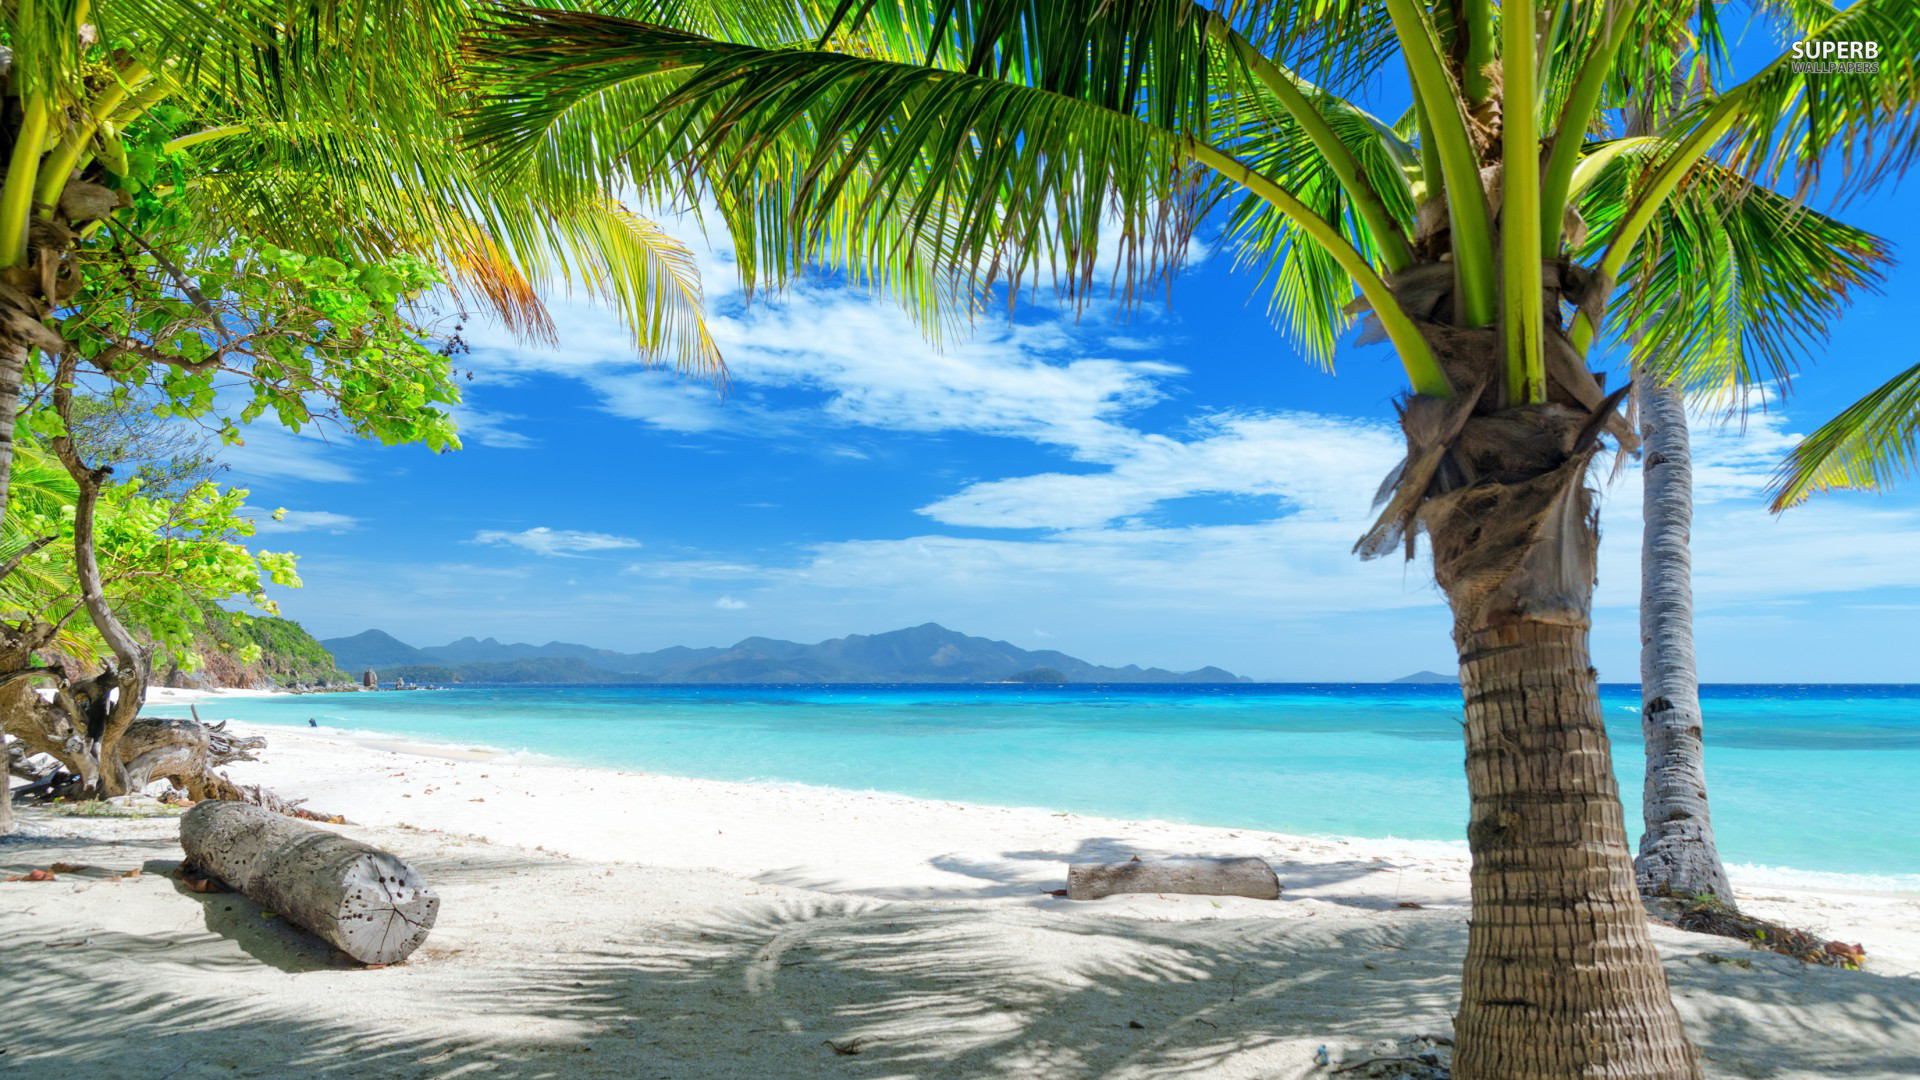 1920x1080 tropical beach hd wallpapers | Desktop Backgrounds for Free HD .